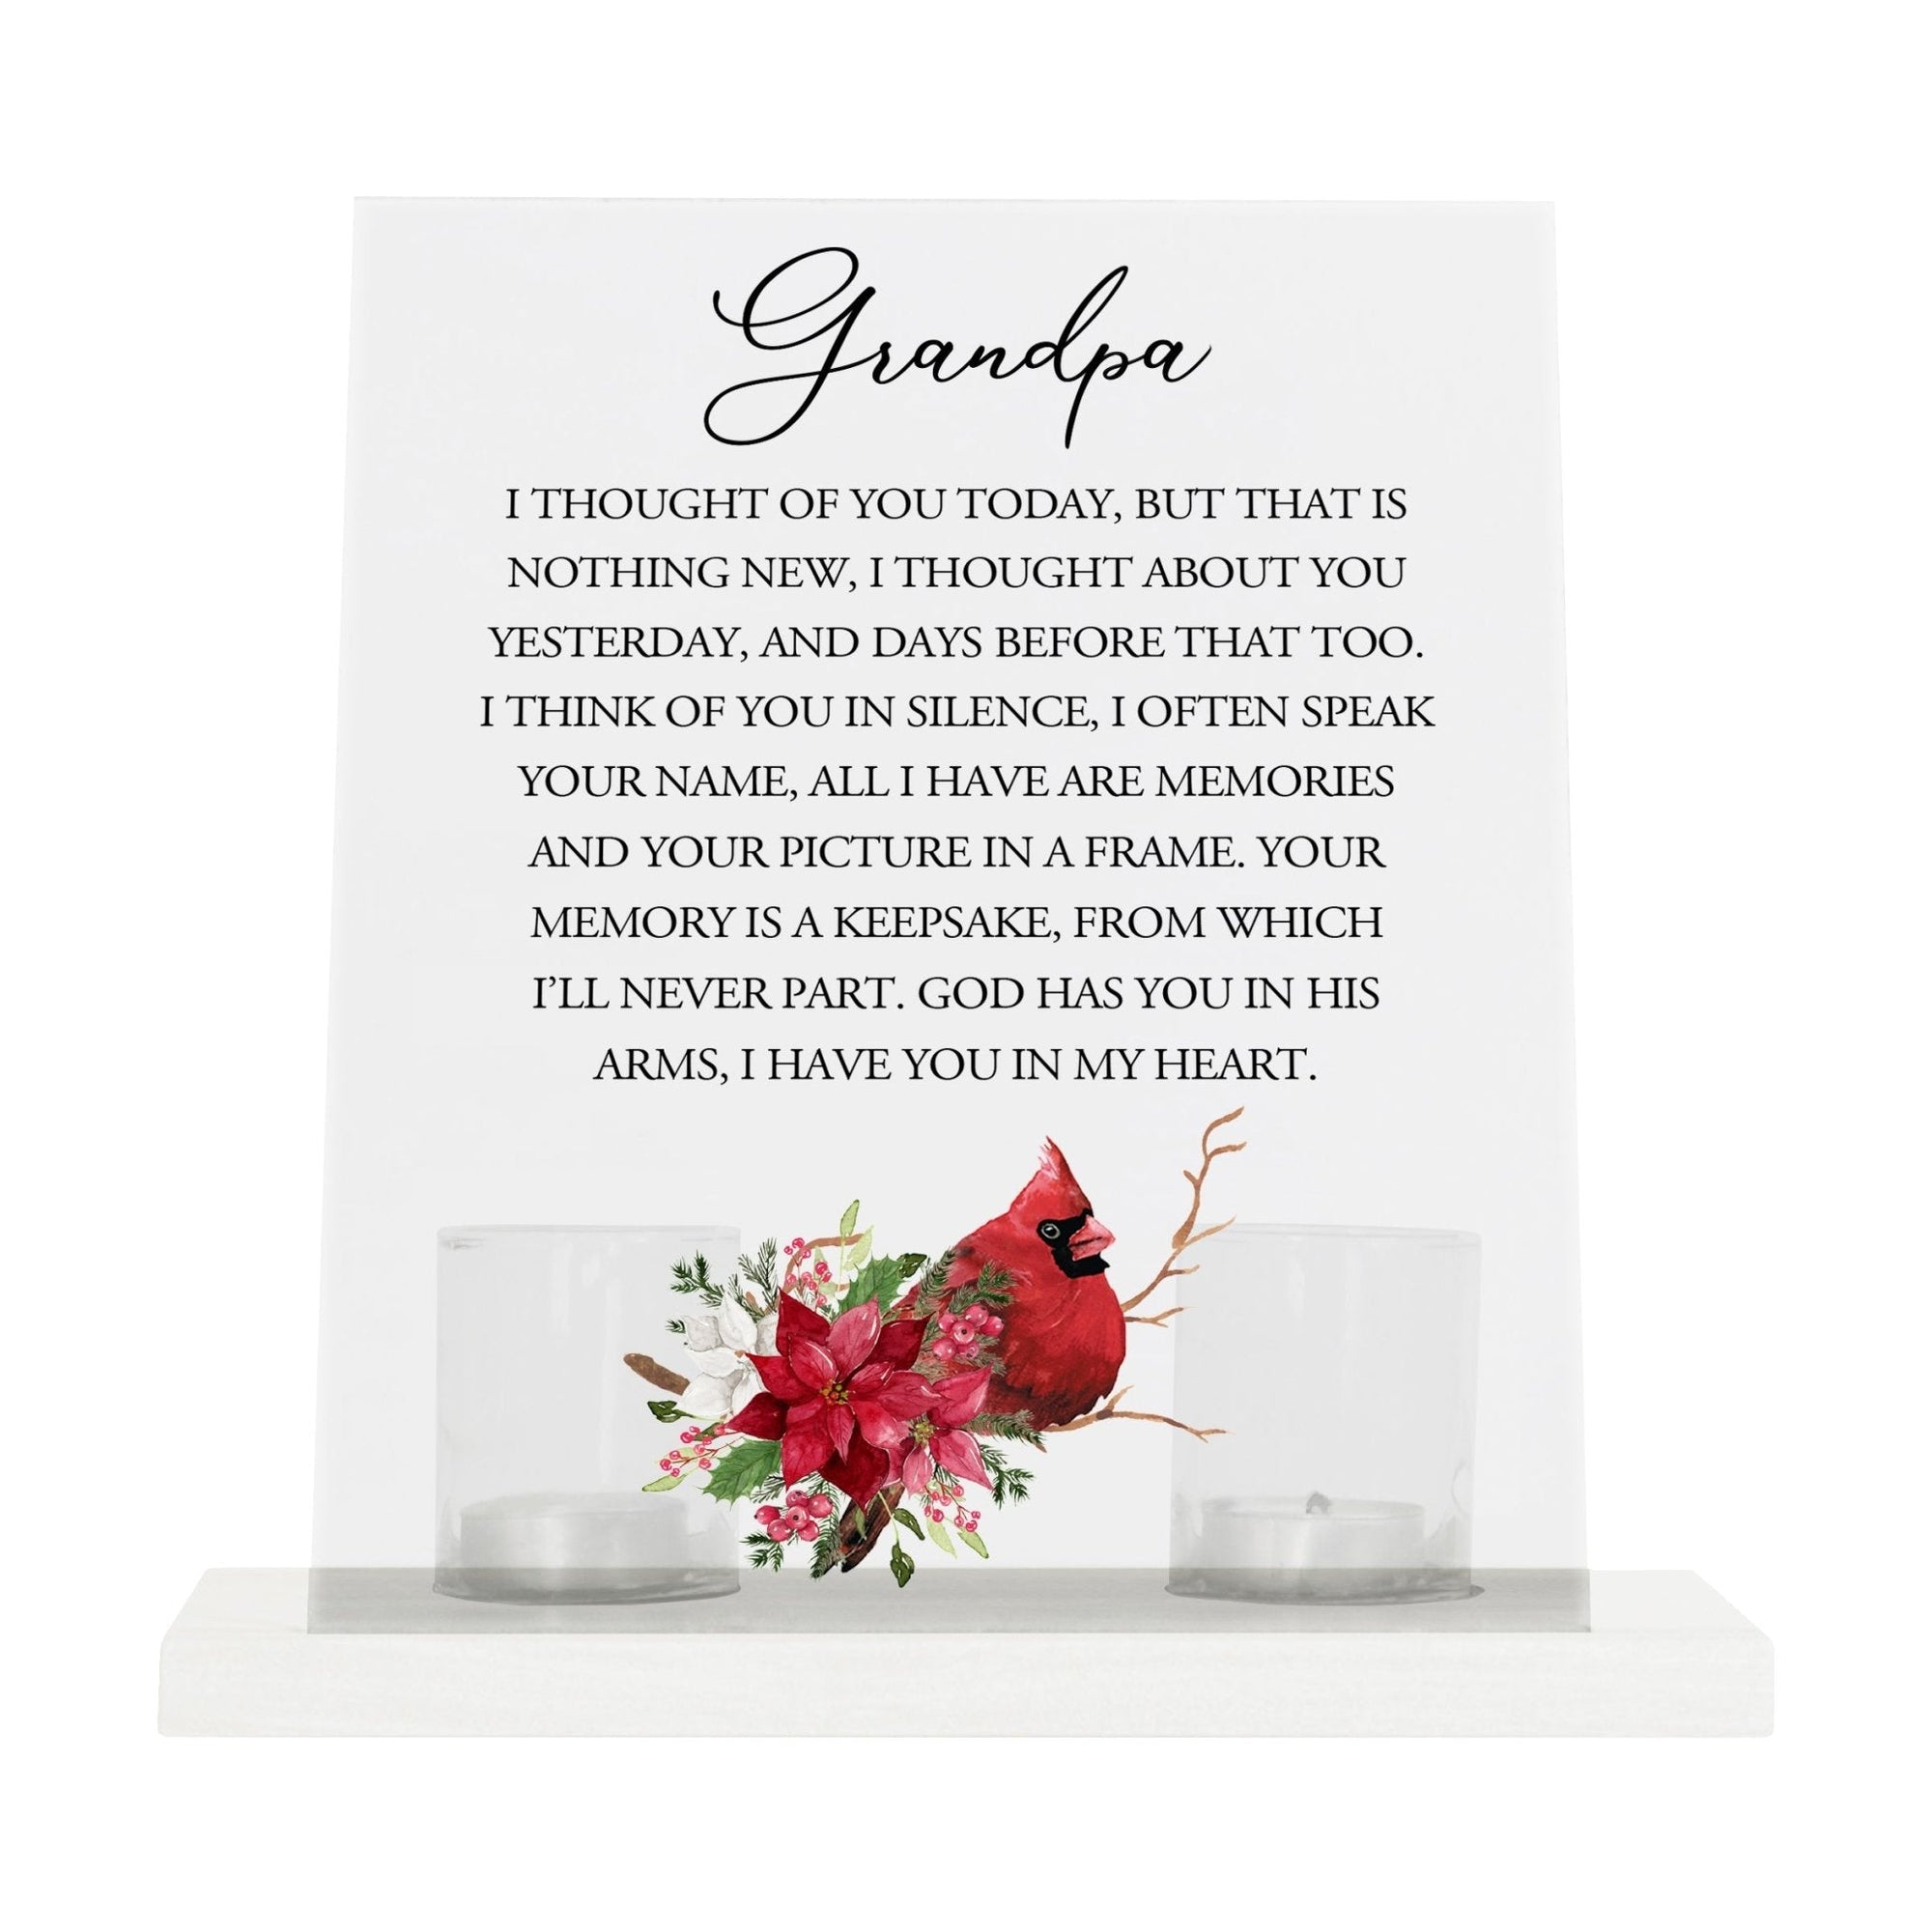 A solemn memorial display featuring a Lifesong Milestones Cardinal Memorial Frosted Acrylic Sign with Base and Votive Candle Holder. The tealight candle holder provides a warm glow, while votive candles surround it, creating a touching memory.